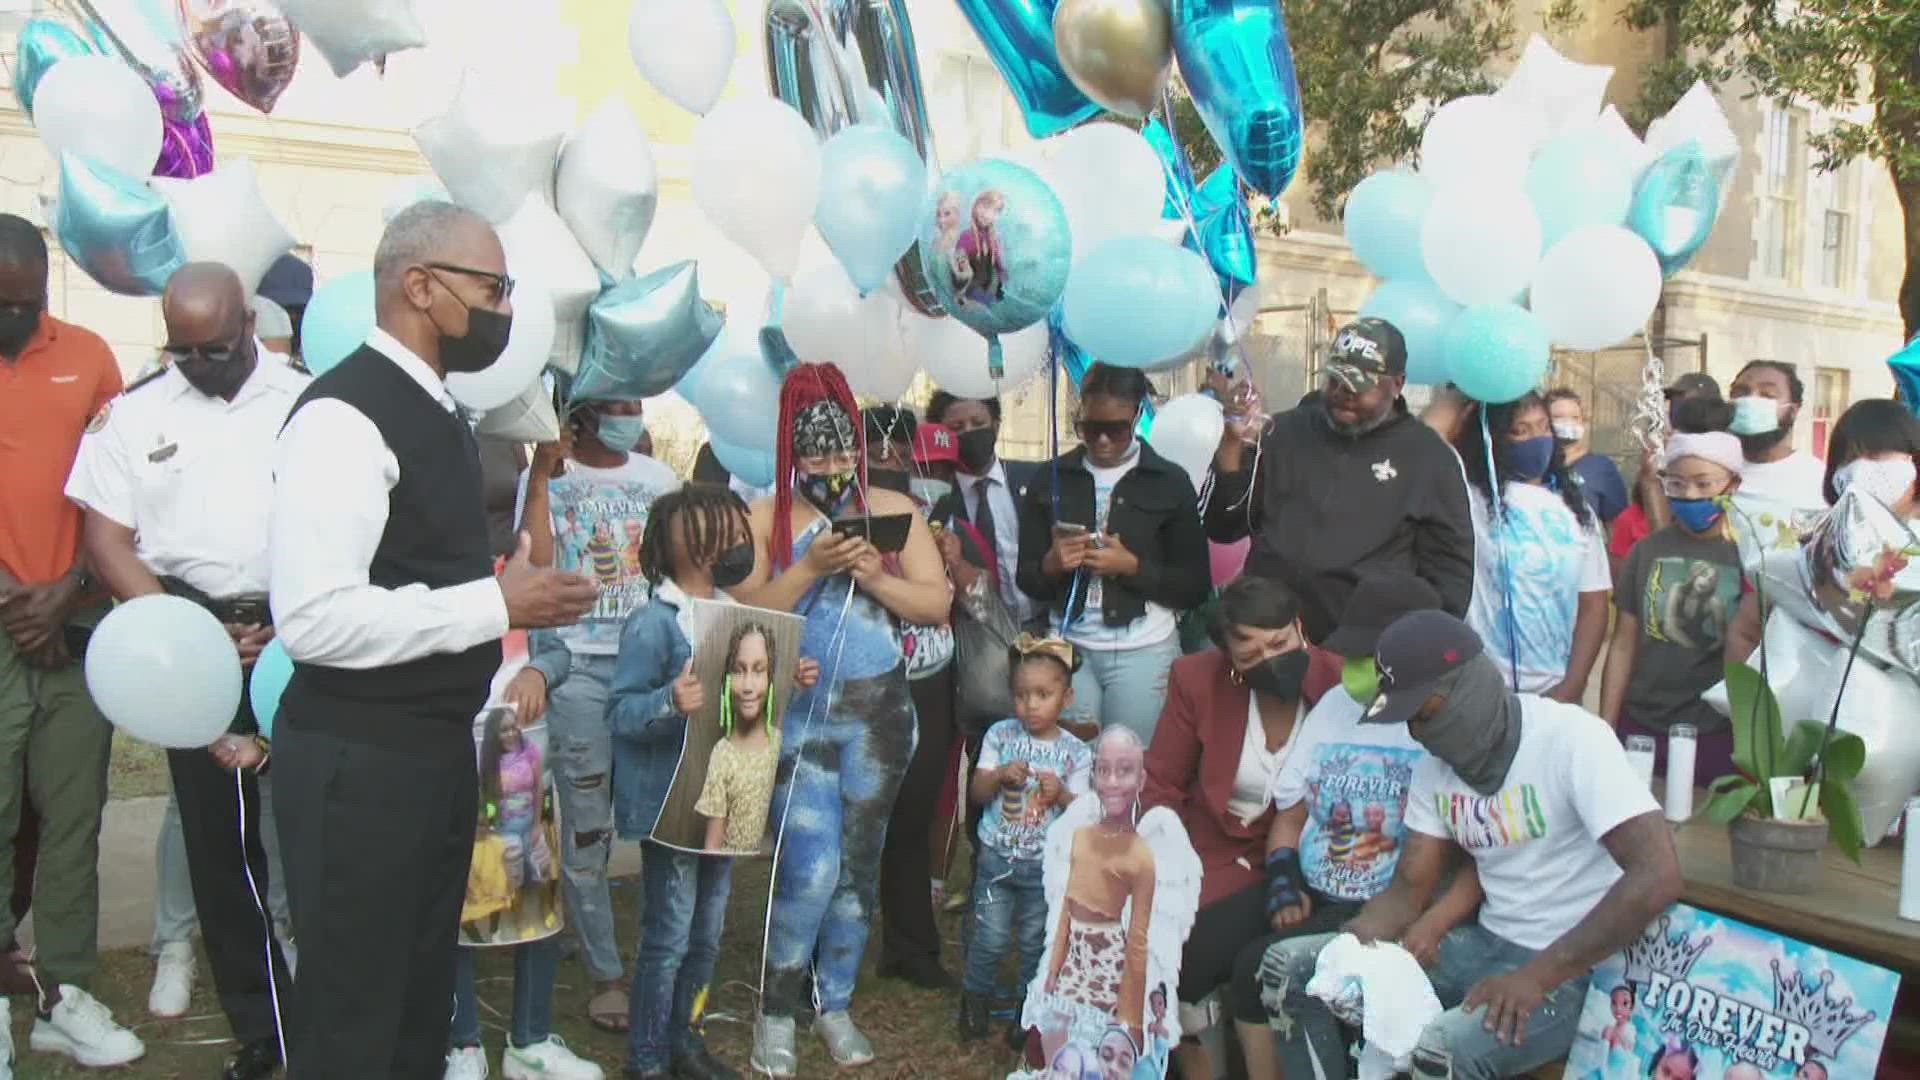 A community came together to celebrate the life of 7-year-old Dillan Burton. She was shot and killed the day after Christmas while in the car with her mother.